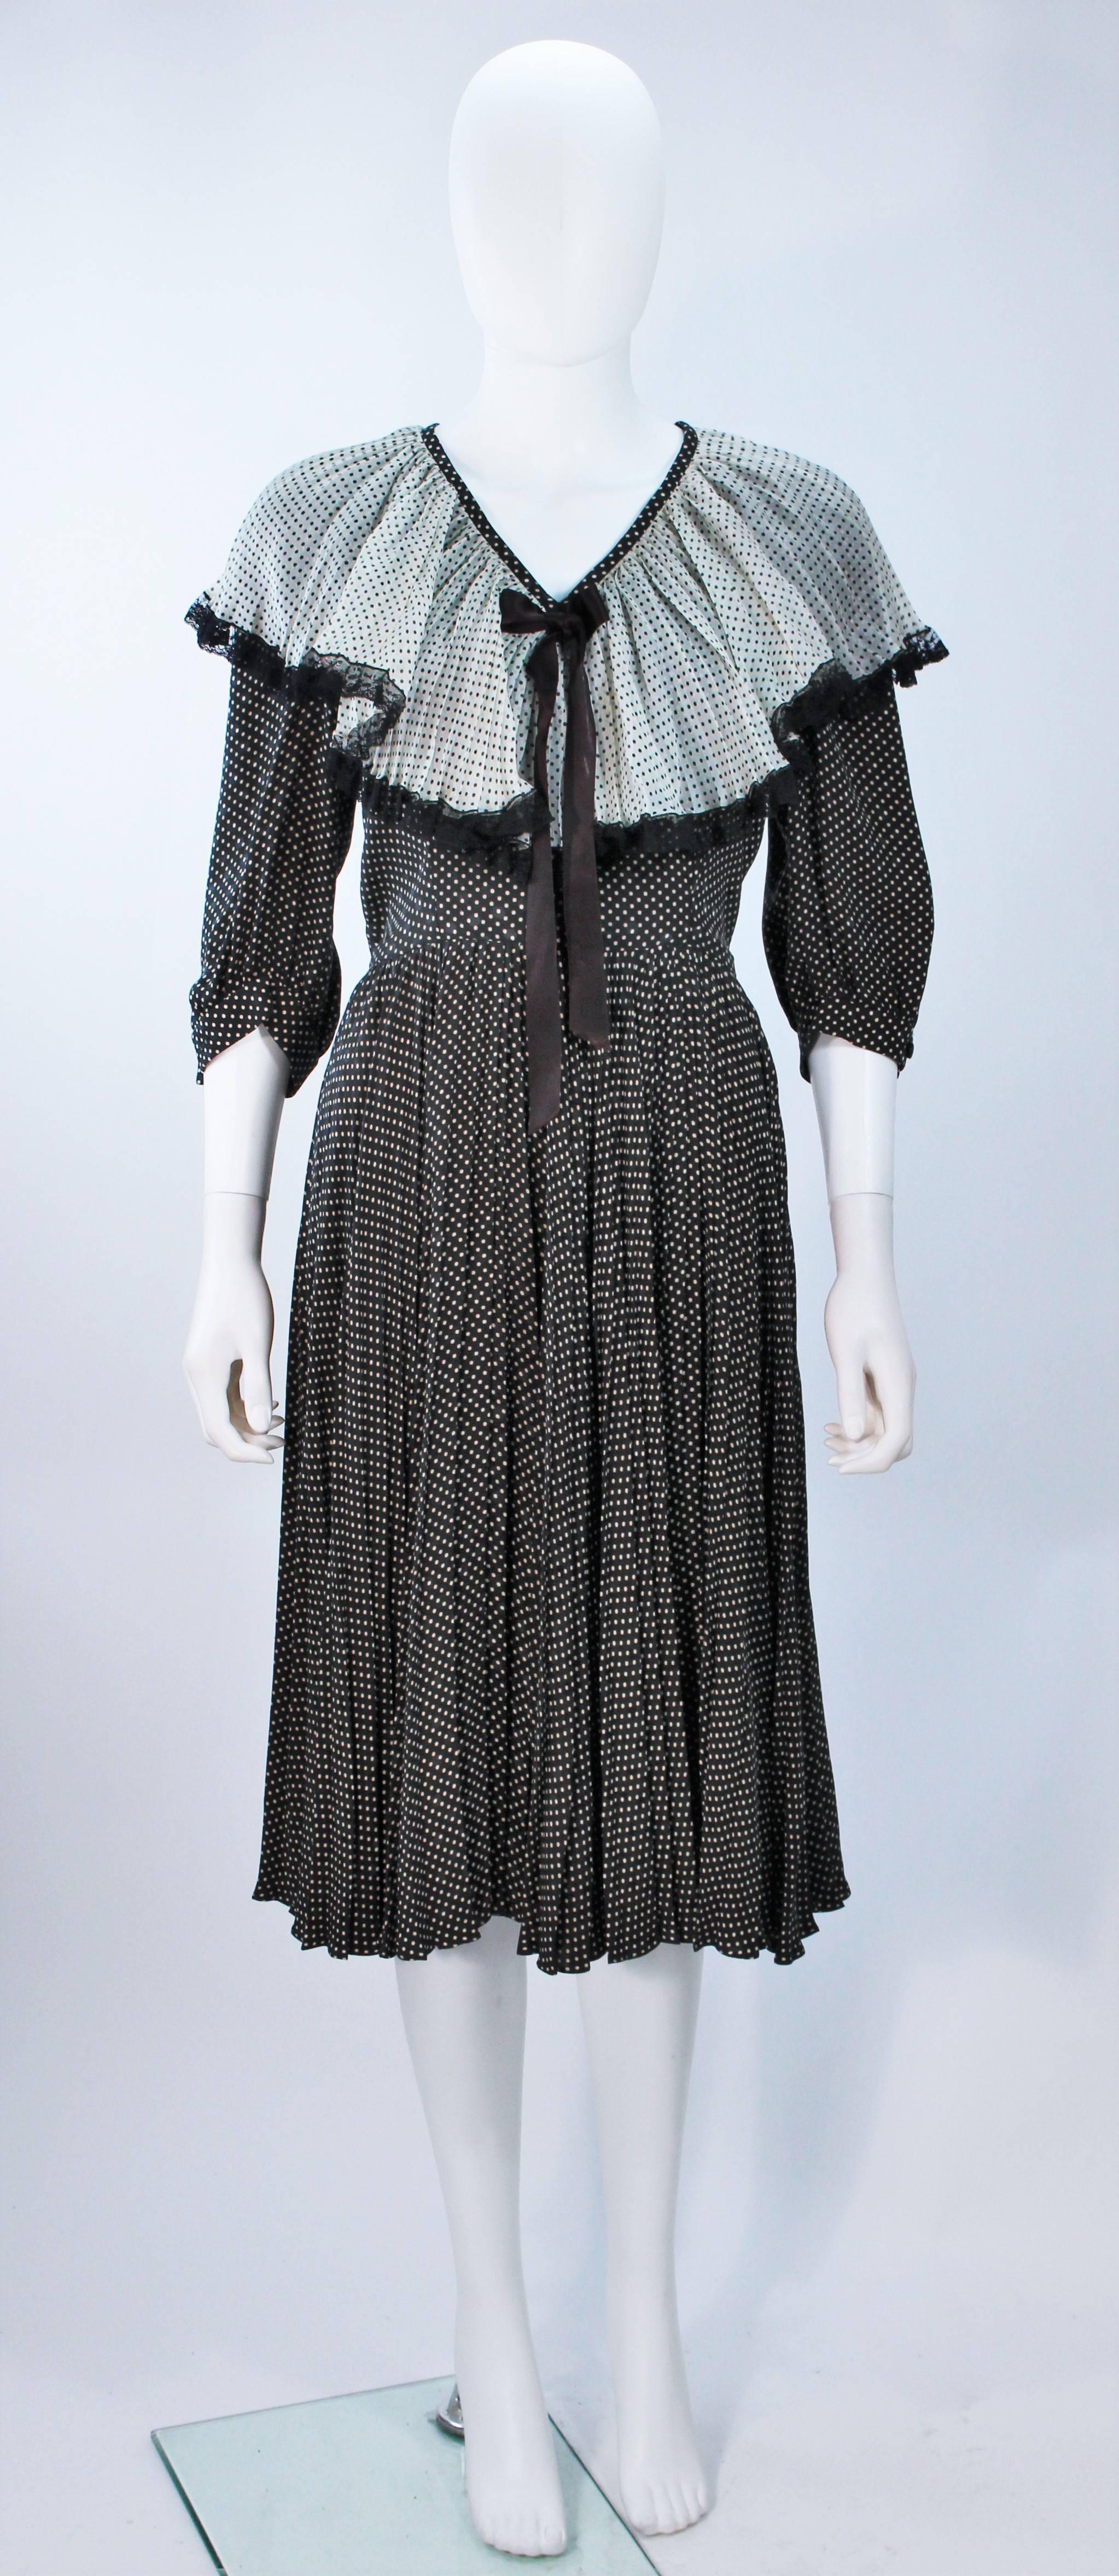  This Valentino attributed design  dress is composed of a pleated polka dot fabric with lace trim. There is a center front satin tie, and side zipper closure. In excellent vintage condition. 

  **Please cross-reference measurements for personal